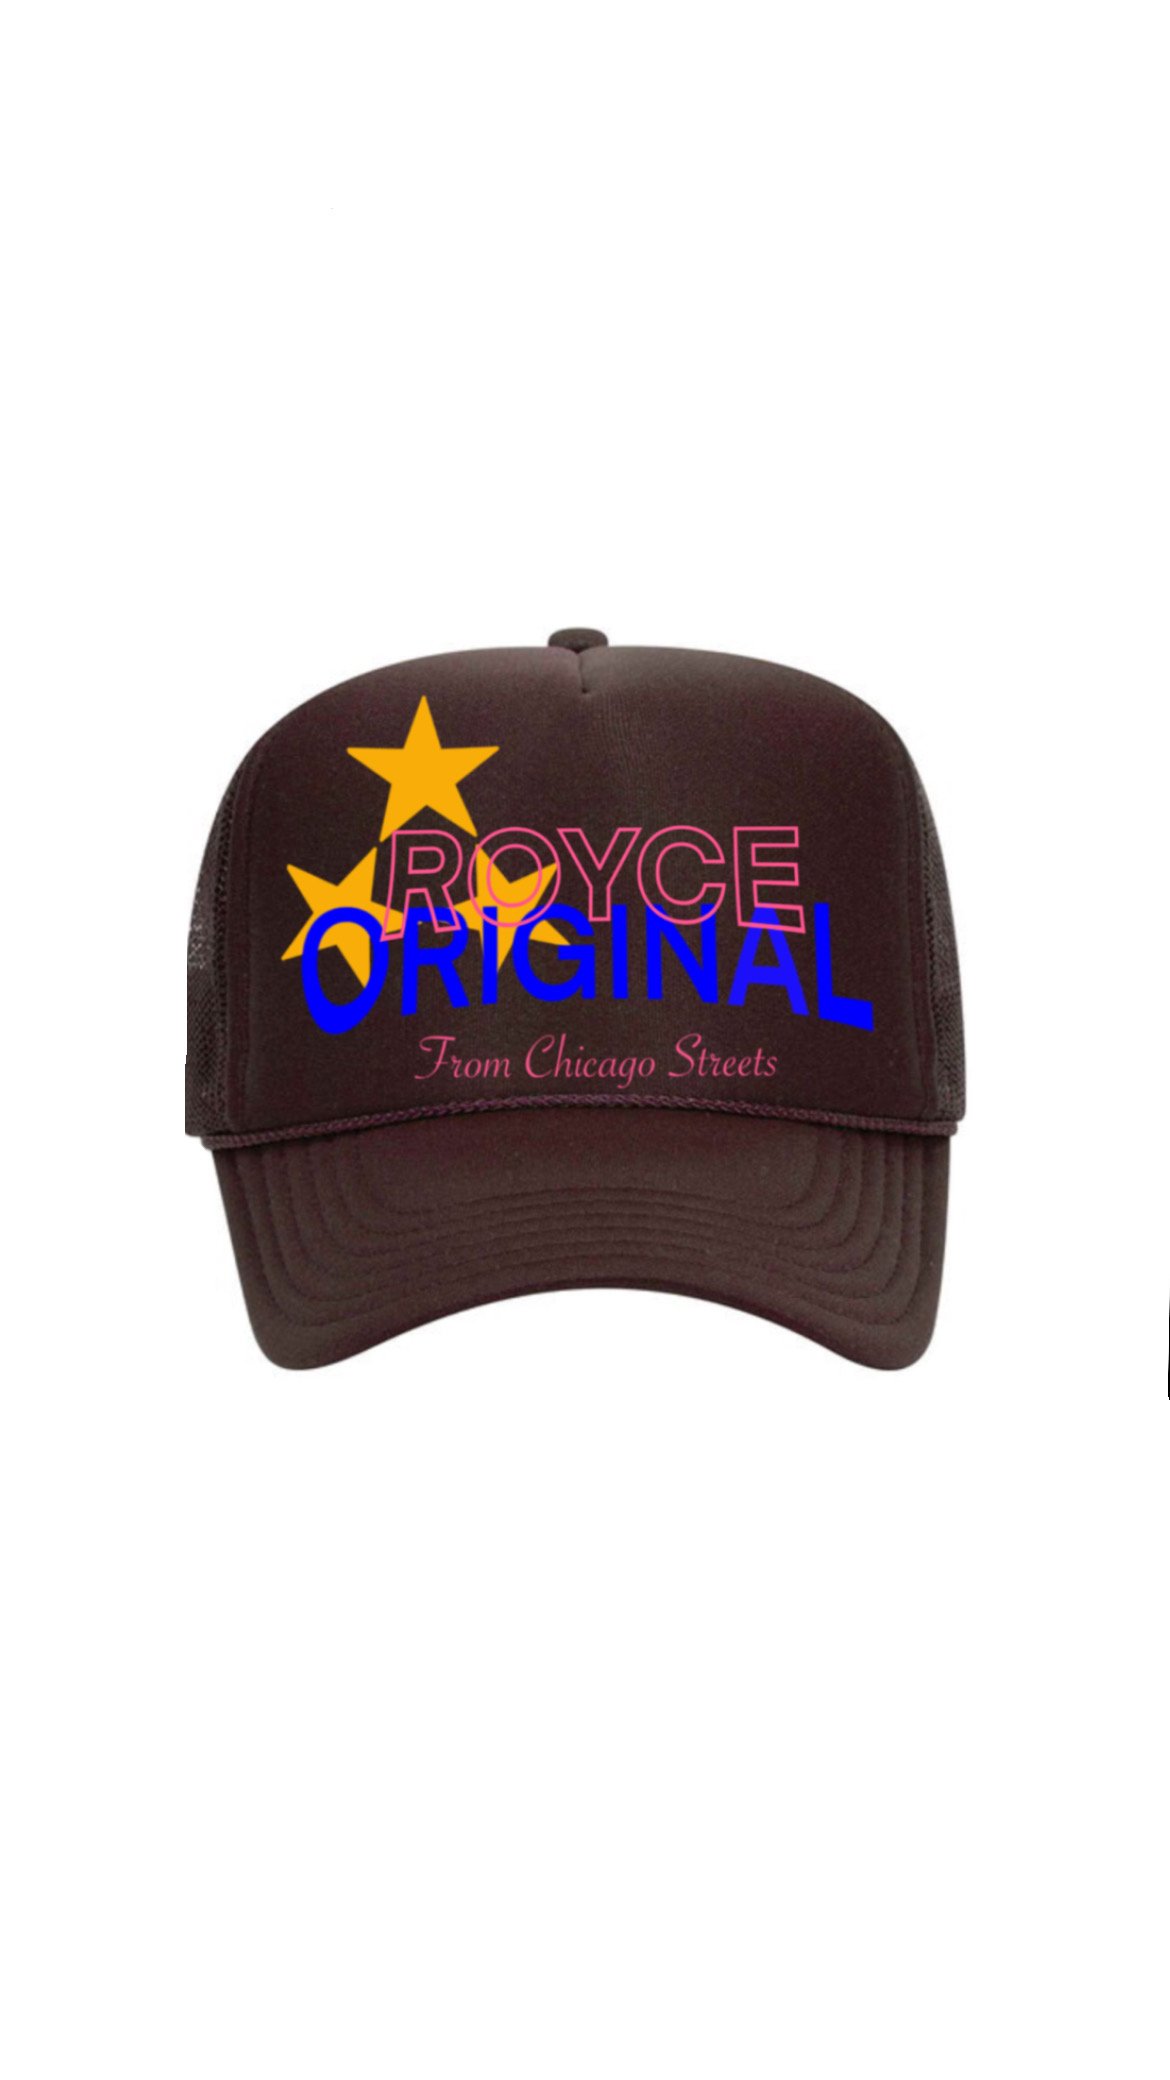 Image of Royce Original "From Chicago Streets" Hat